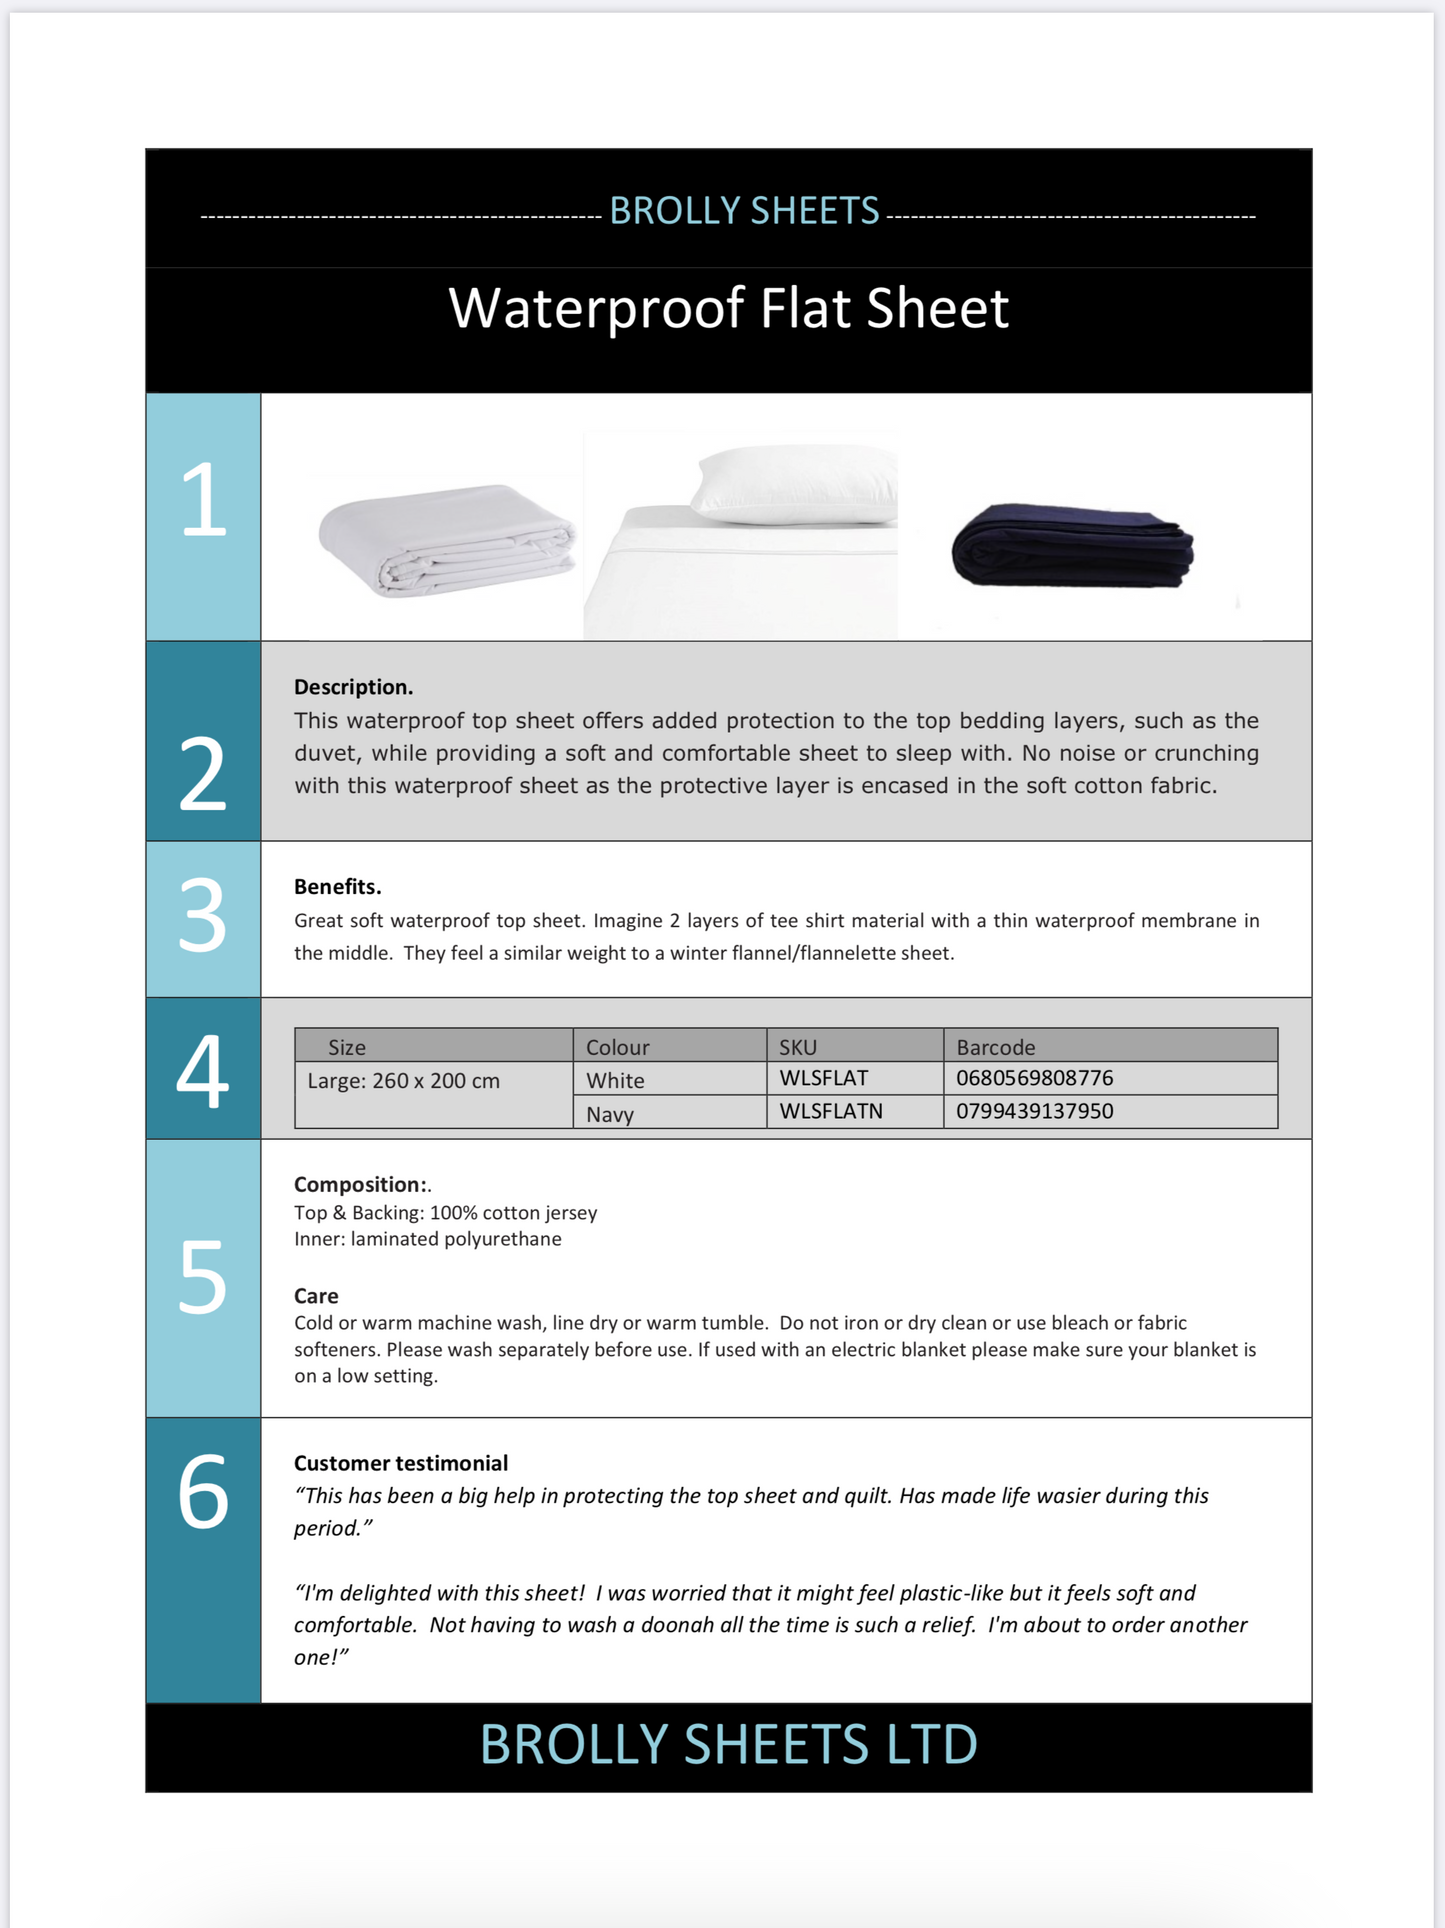 WATERPROOF FLAT SHEETS – FOR PETS (from Brolly Sheets)